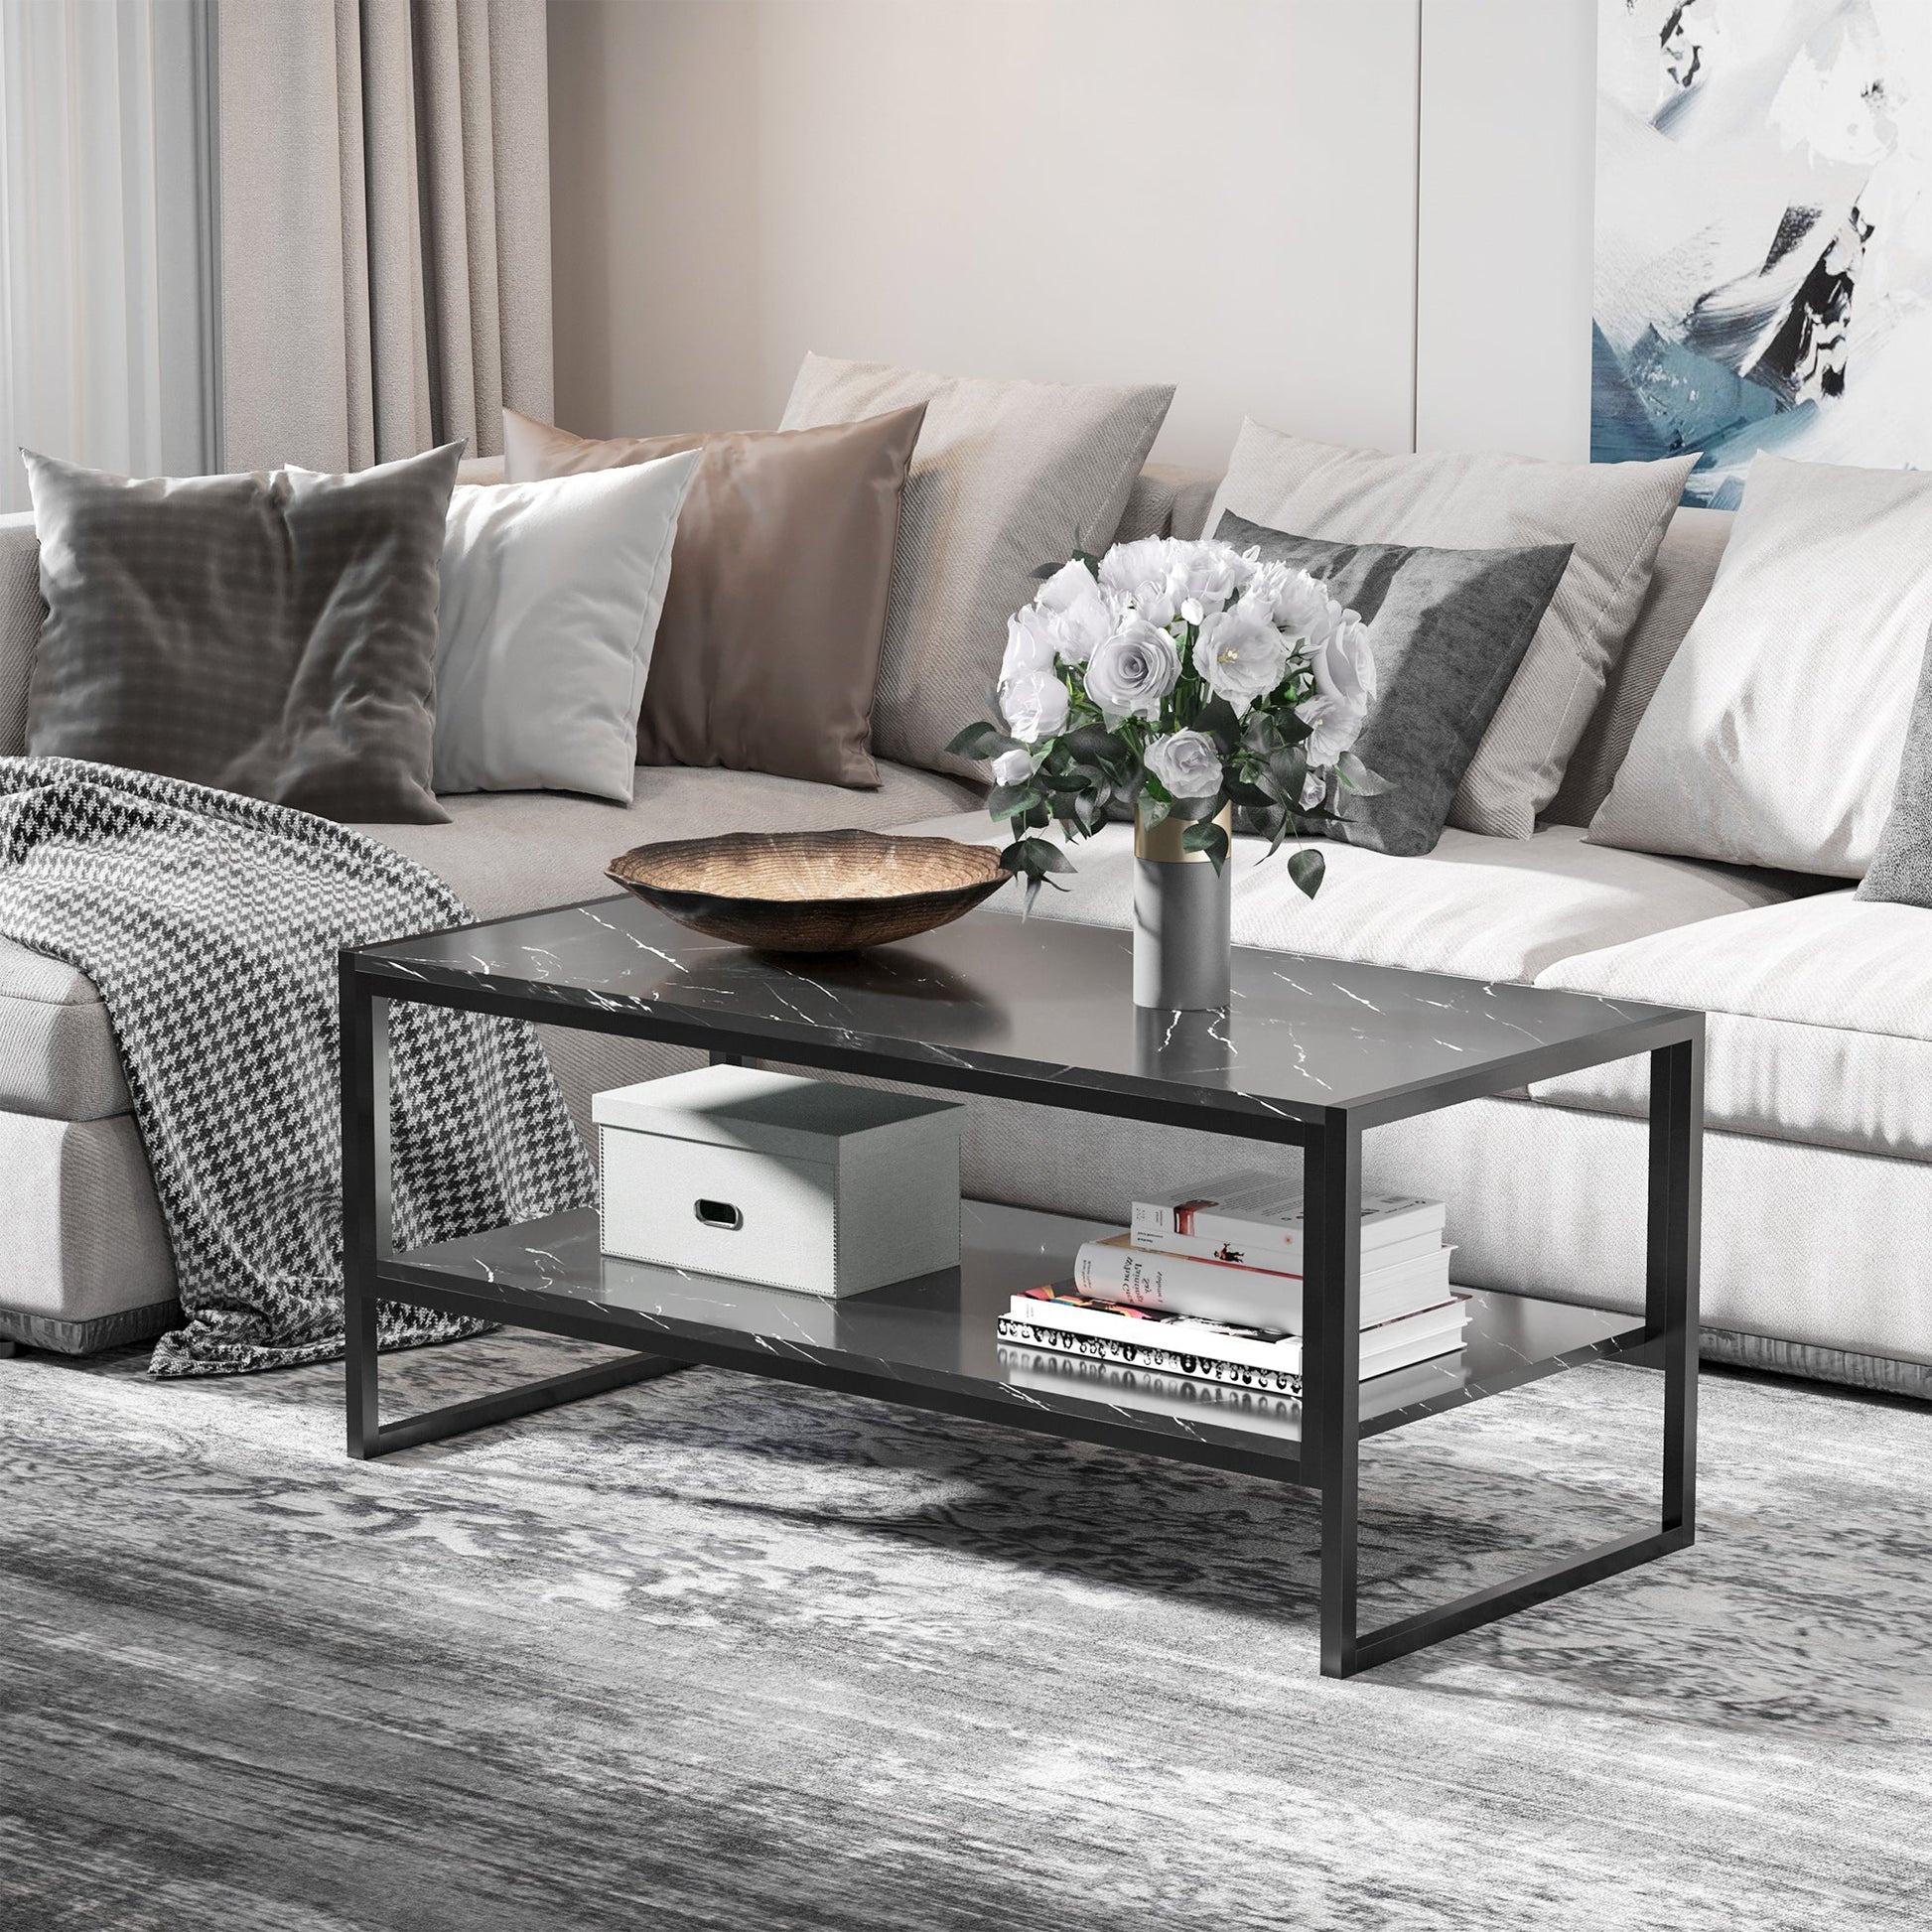 2-Tier Coffee Table with Storage Shelf, Cocktail Table with Marble Textured Table Top, for Living Room Bedroom Dorm, Black at Gallery Canada